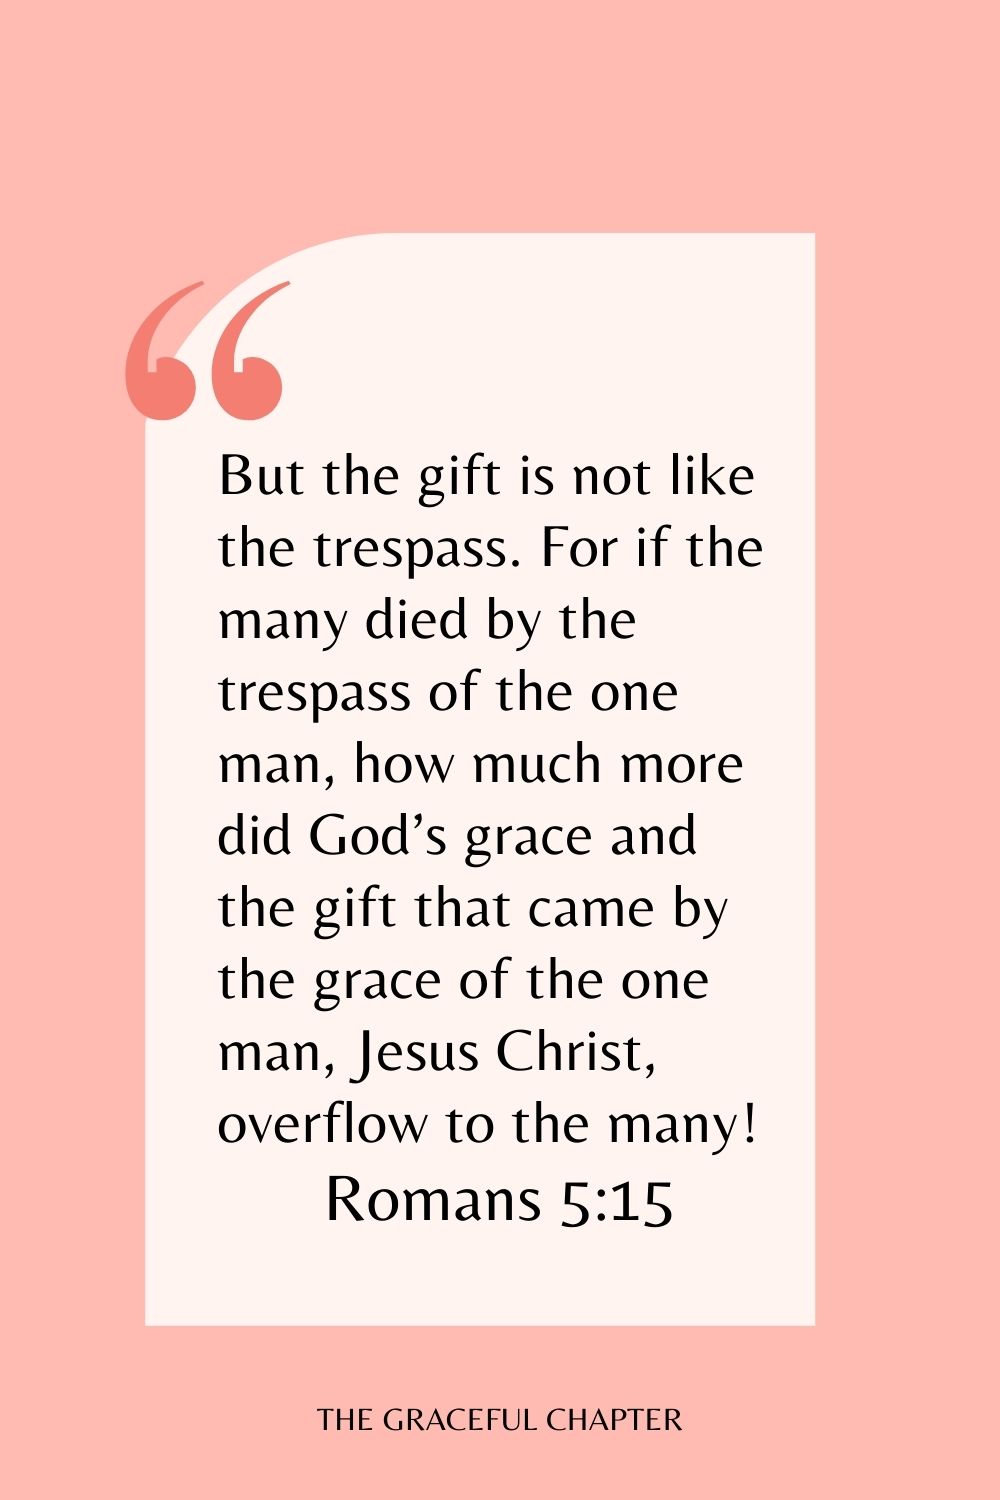 But the gift is not like the trespass. For if the many died by the trespass of the one man, how much more did God’s grace and the gift that came by the grace of the one man, Jesus Christ, overflow to the many! Romans 5:15